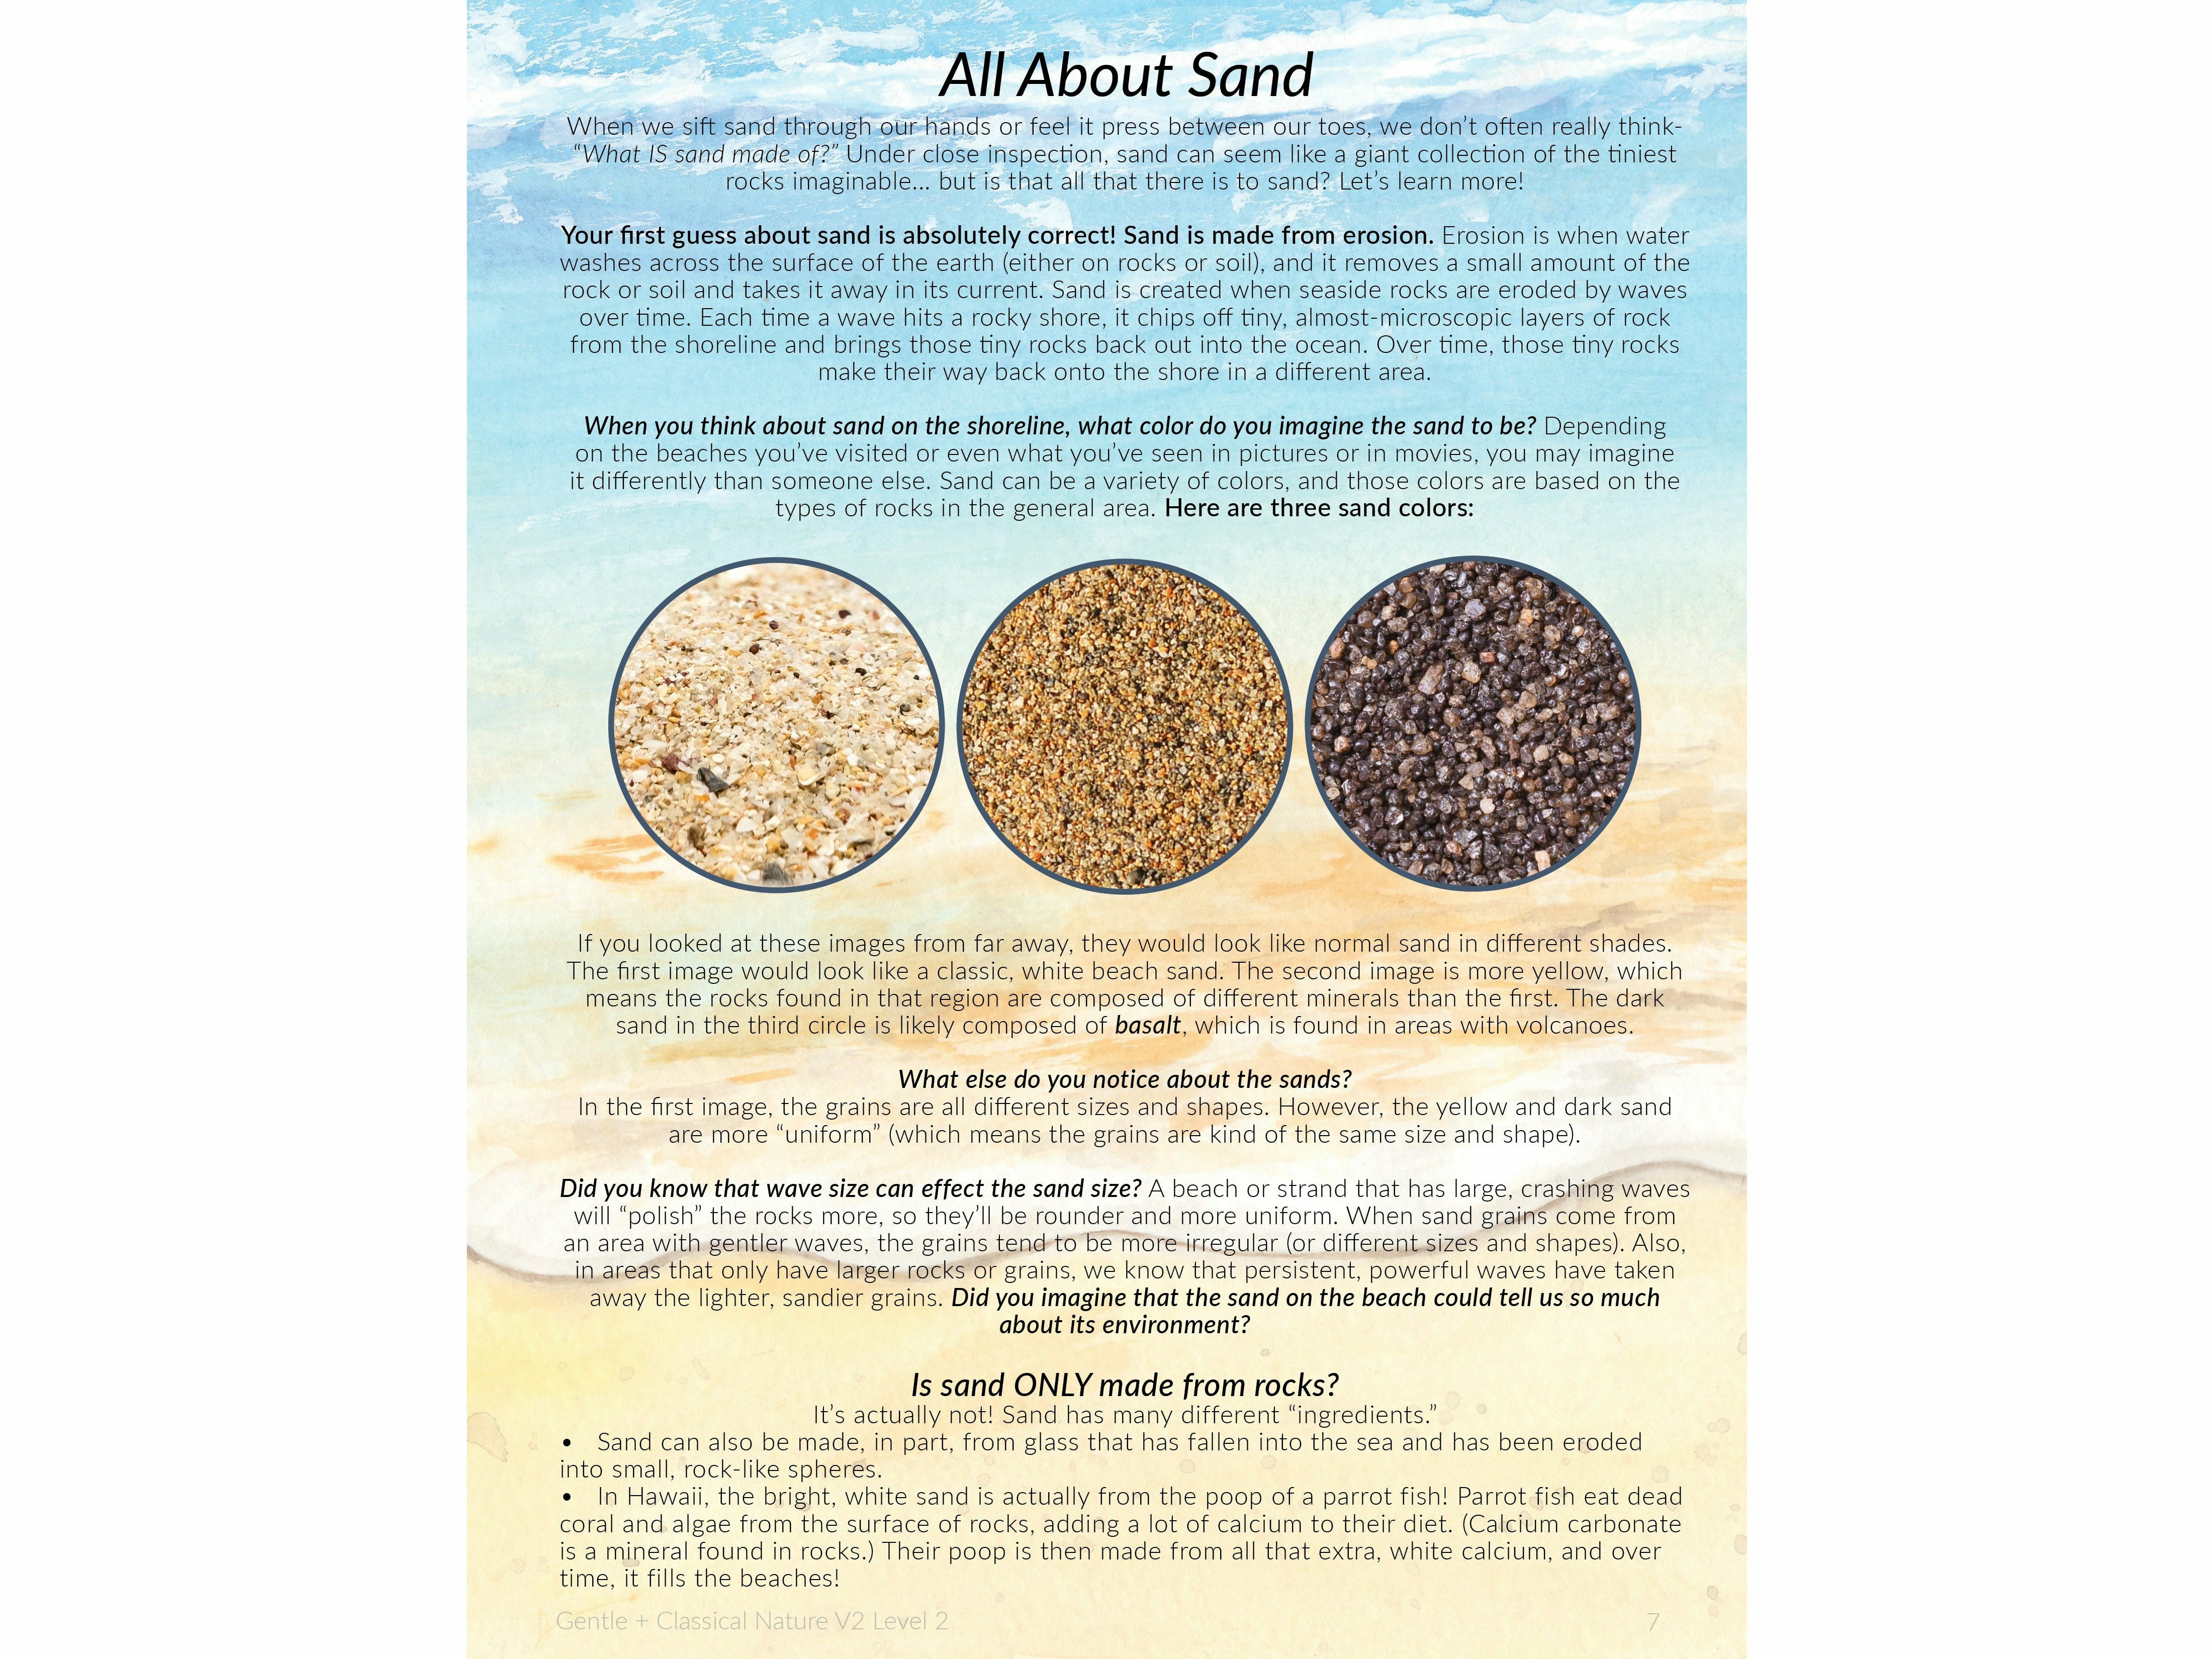 There's more to sand than you think: Here's how it differs along